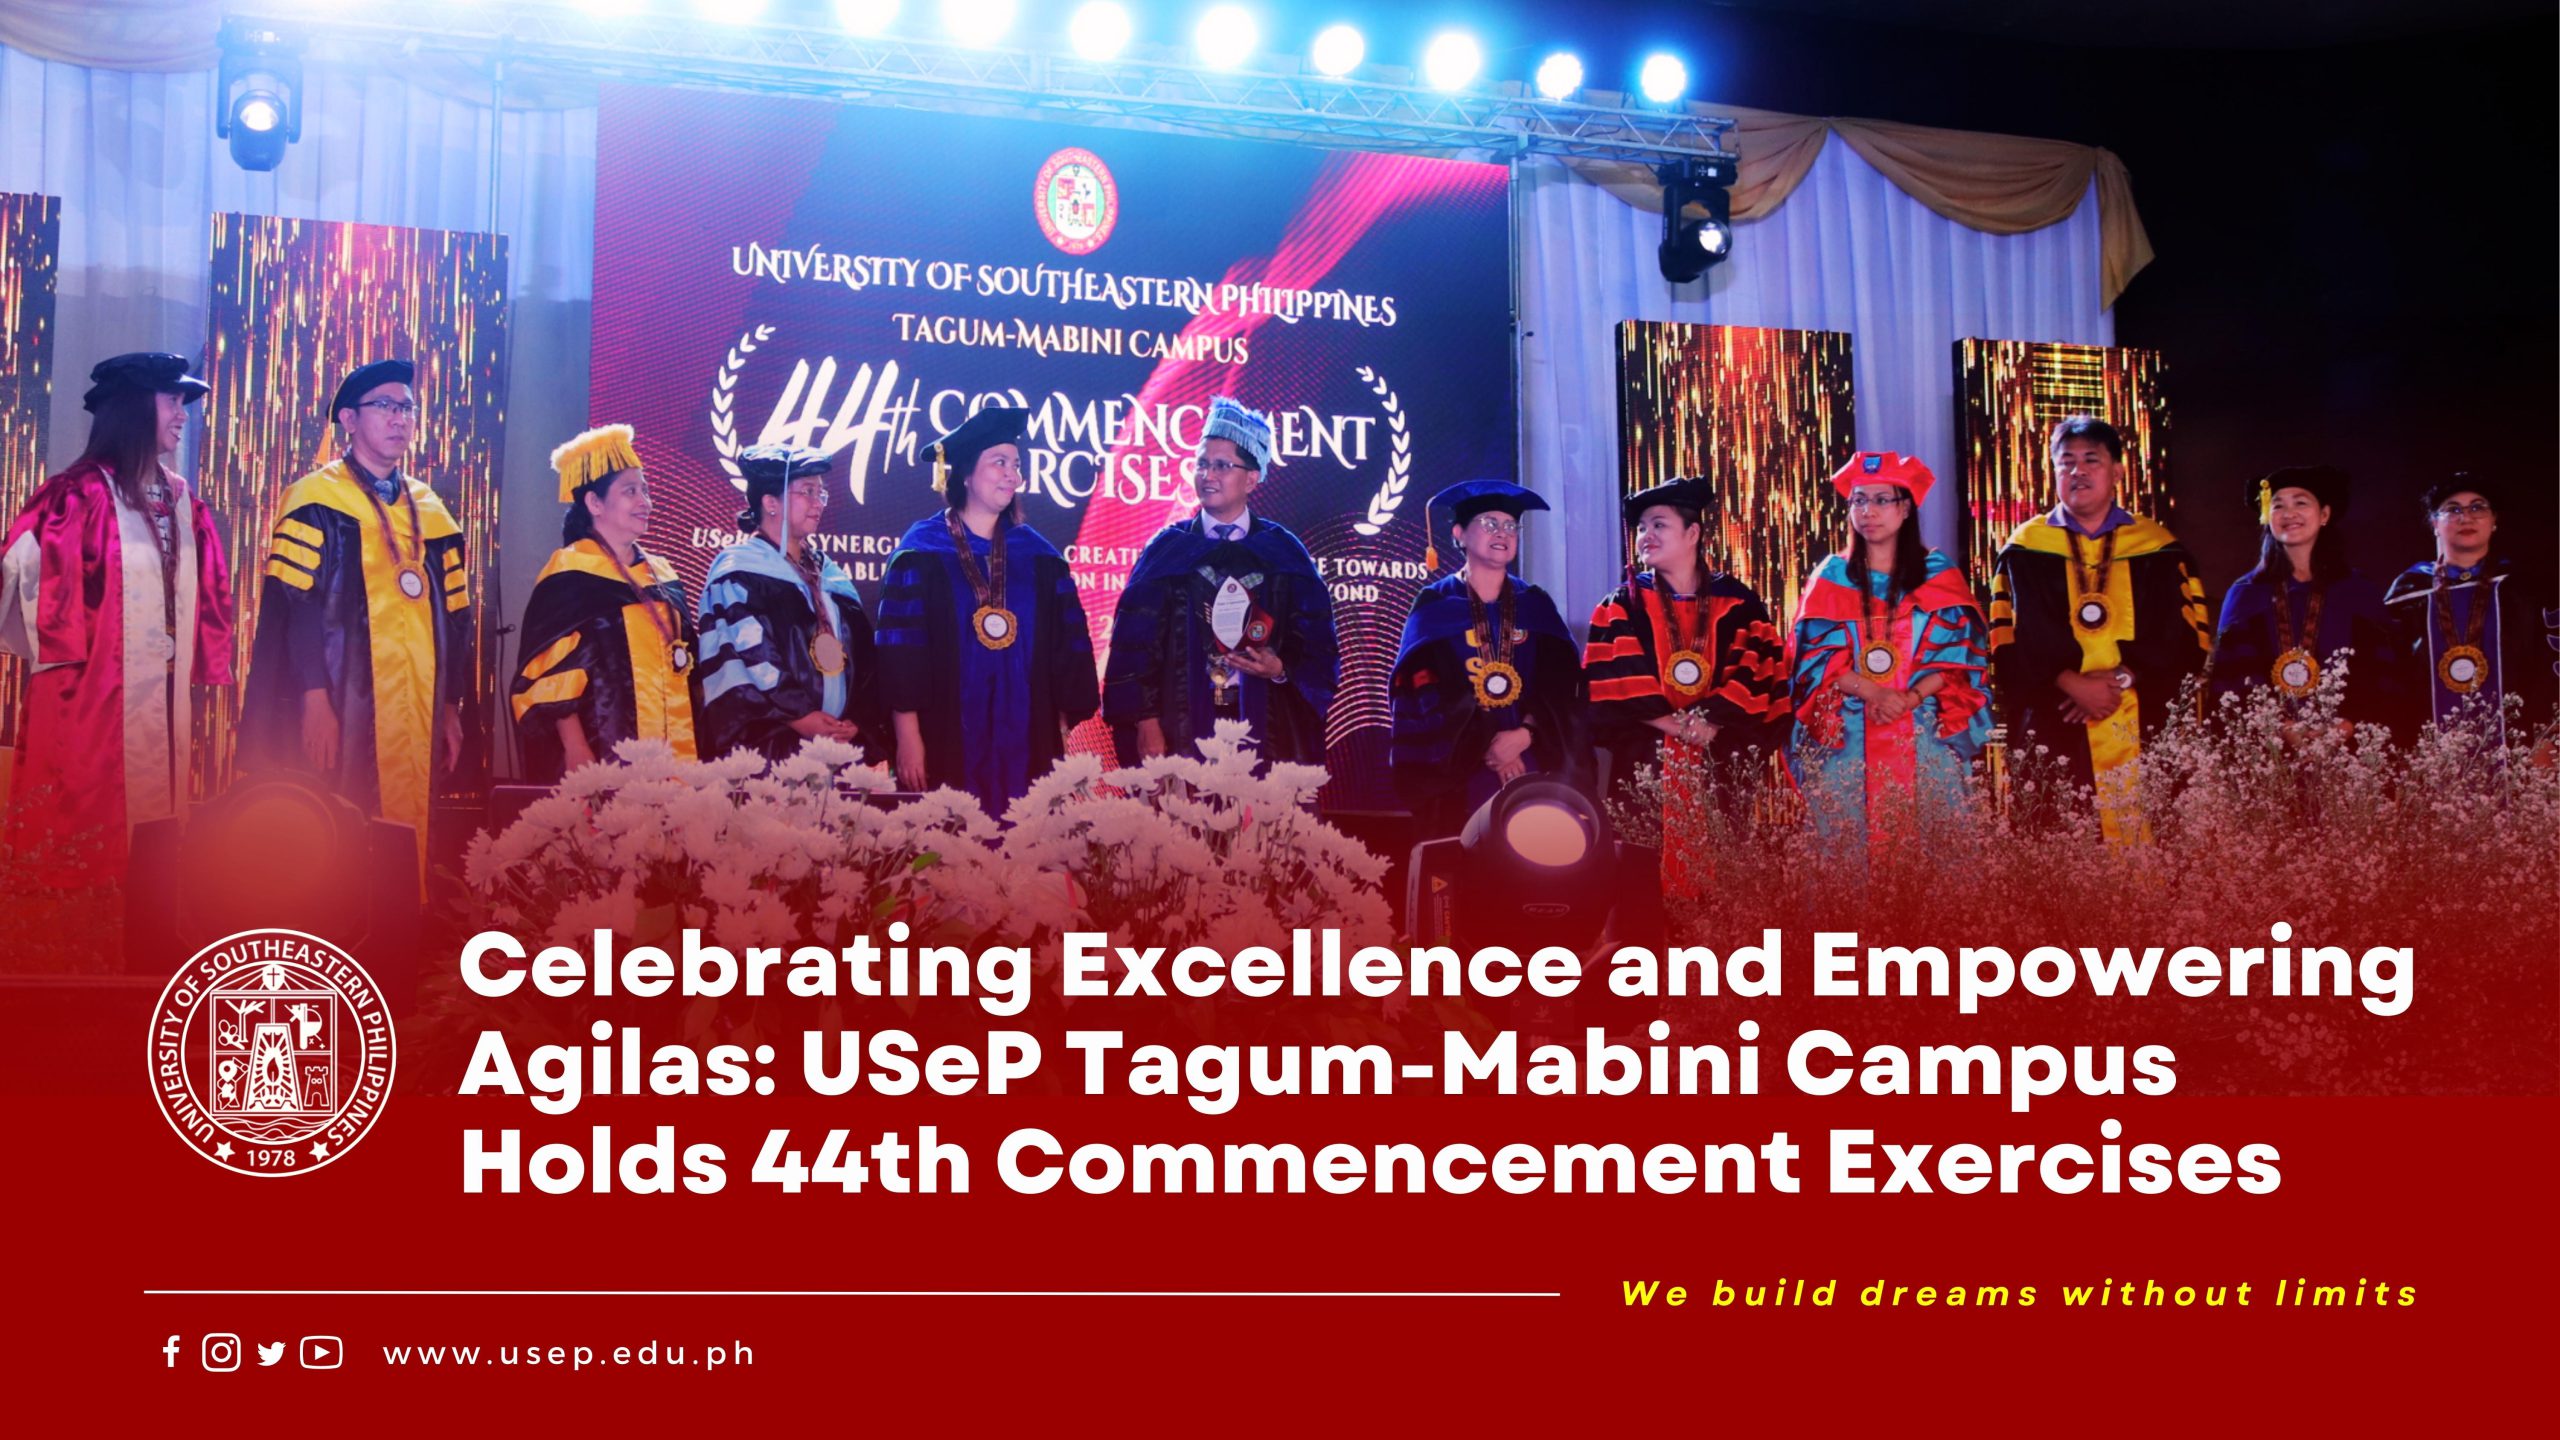 Celebrating Excellence and Empowering Agilas: USeP Tagum-Mabini Campus Holds 44th Commencement Exercises